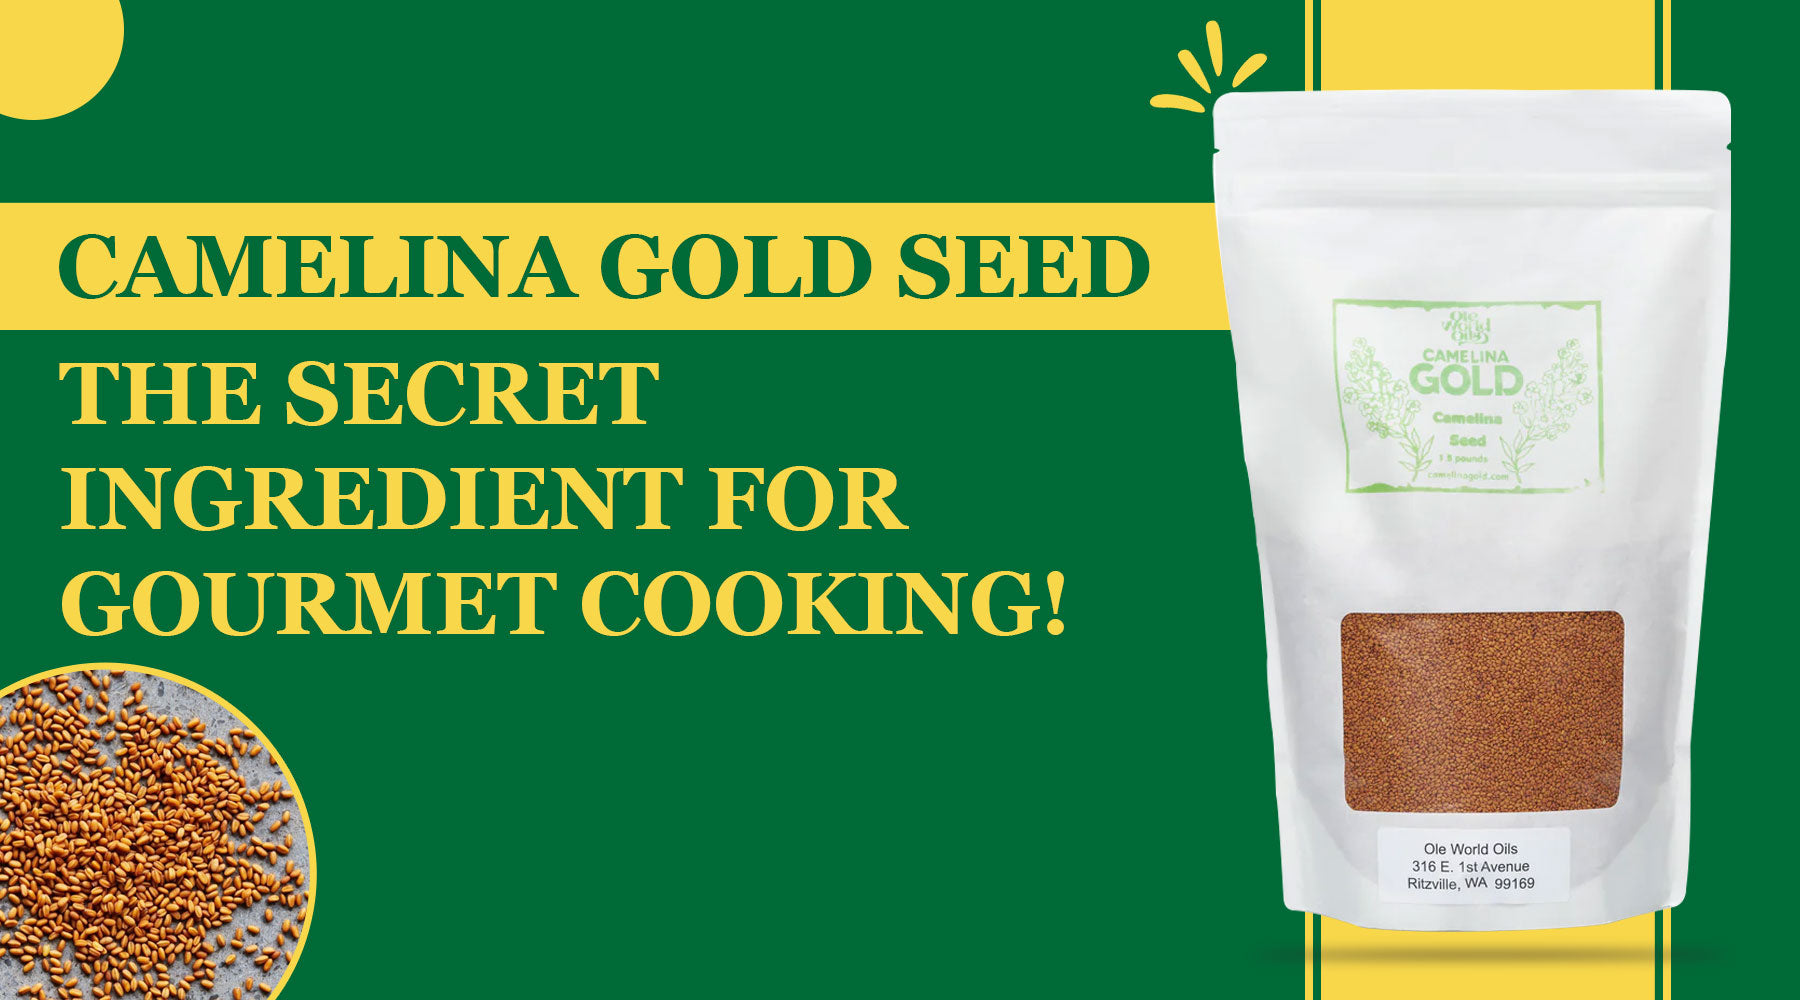 Camelina Gold Seed: The Secret Ingredient for Gourmet Cooking!